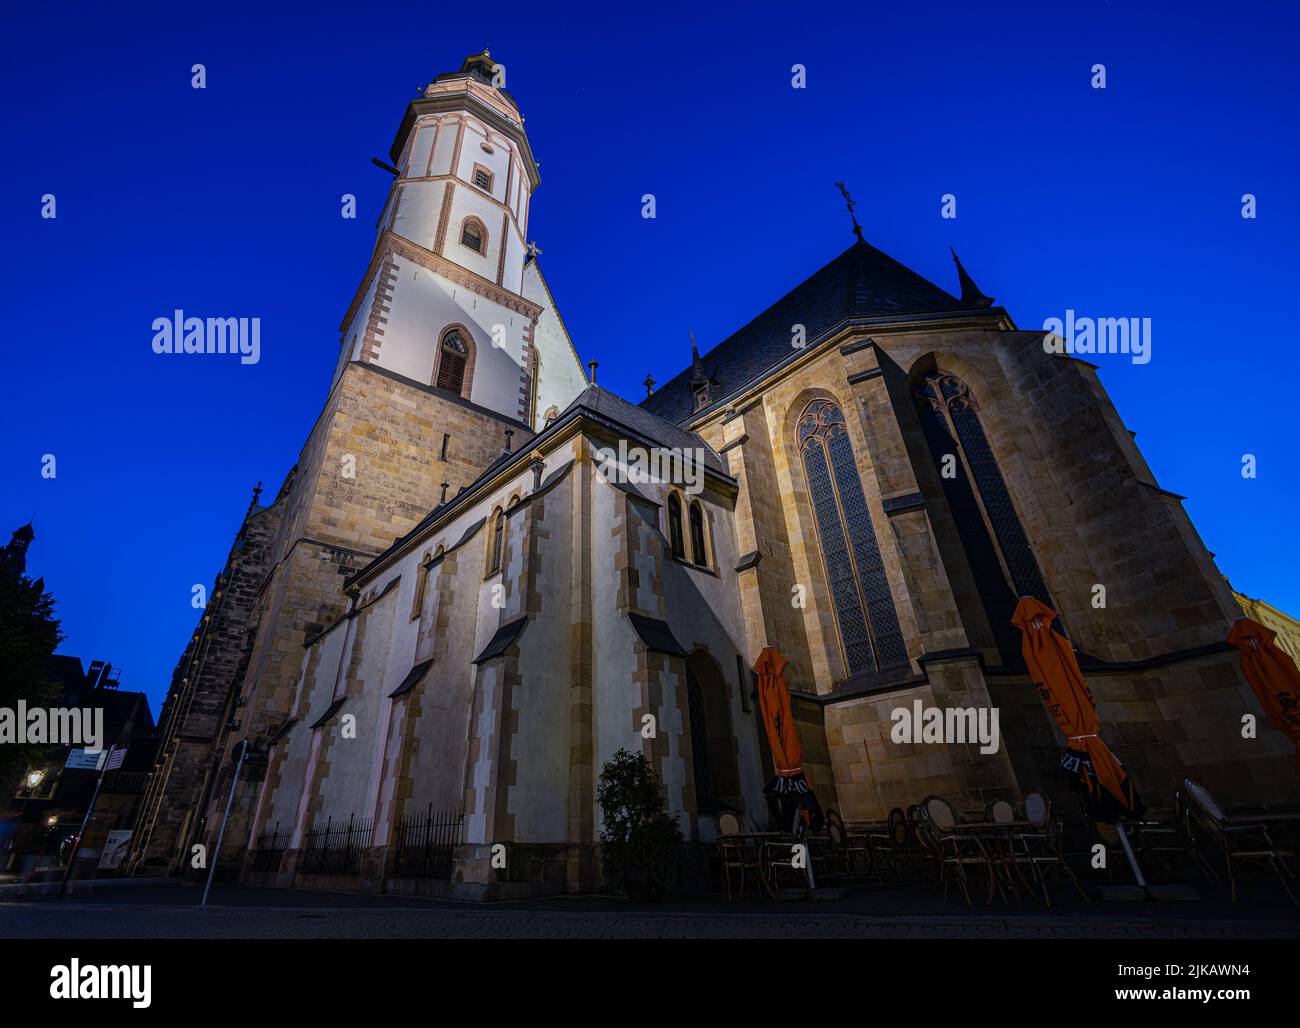 Leipzig, Germany - July 02, 2022: The city Center of the saxony metropolis at night. The Thomaskirche or St. Thomas Church illuminated under clear dar Stock Photo